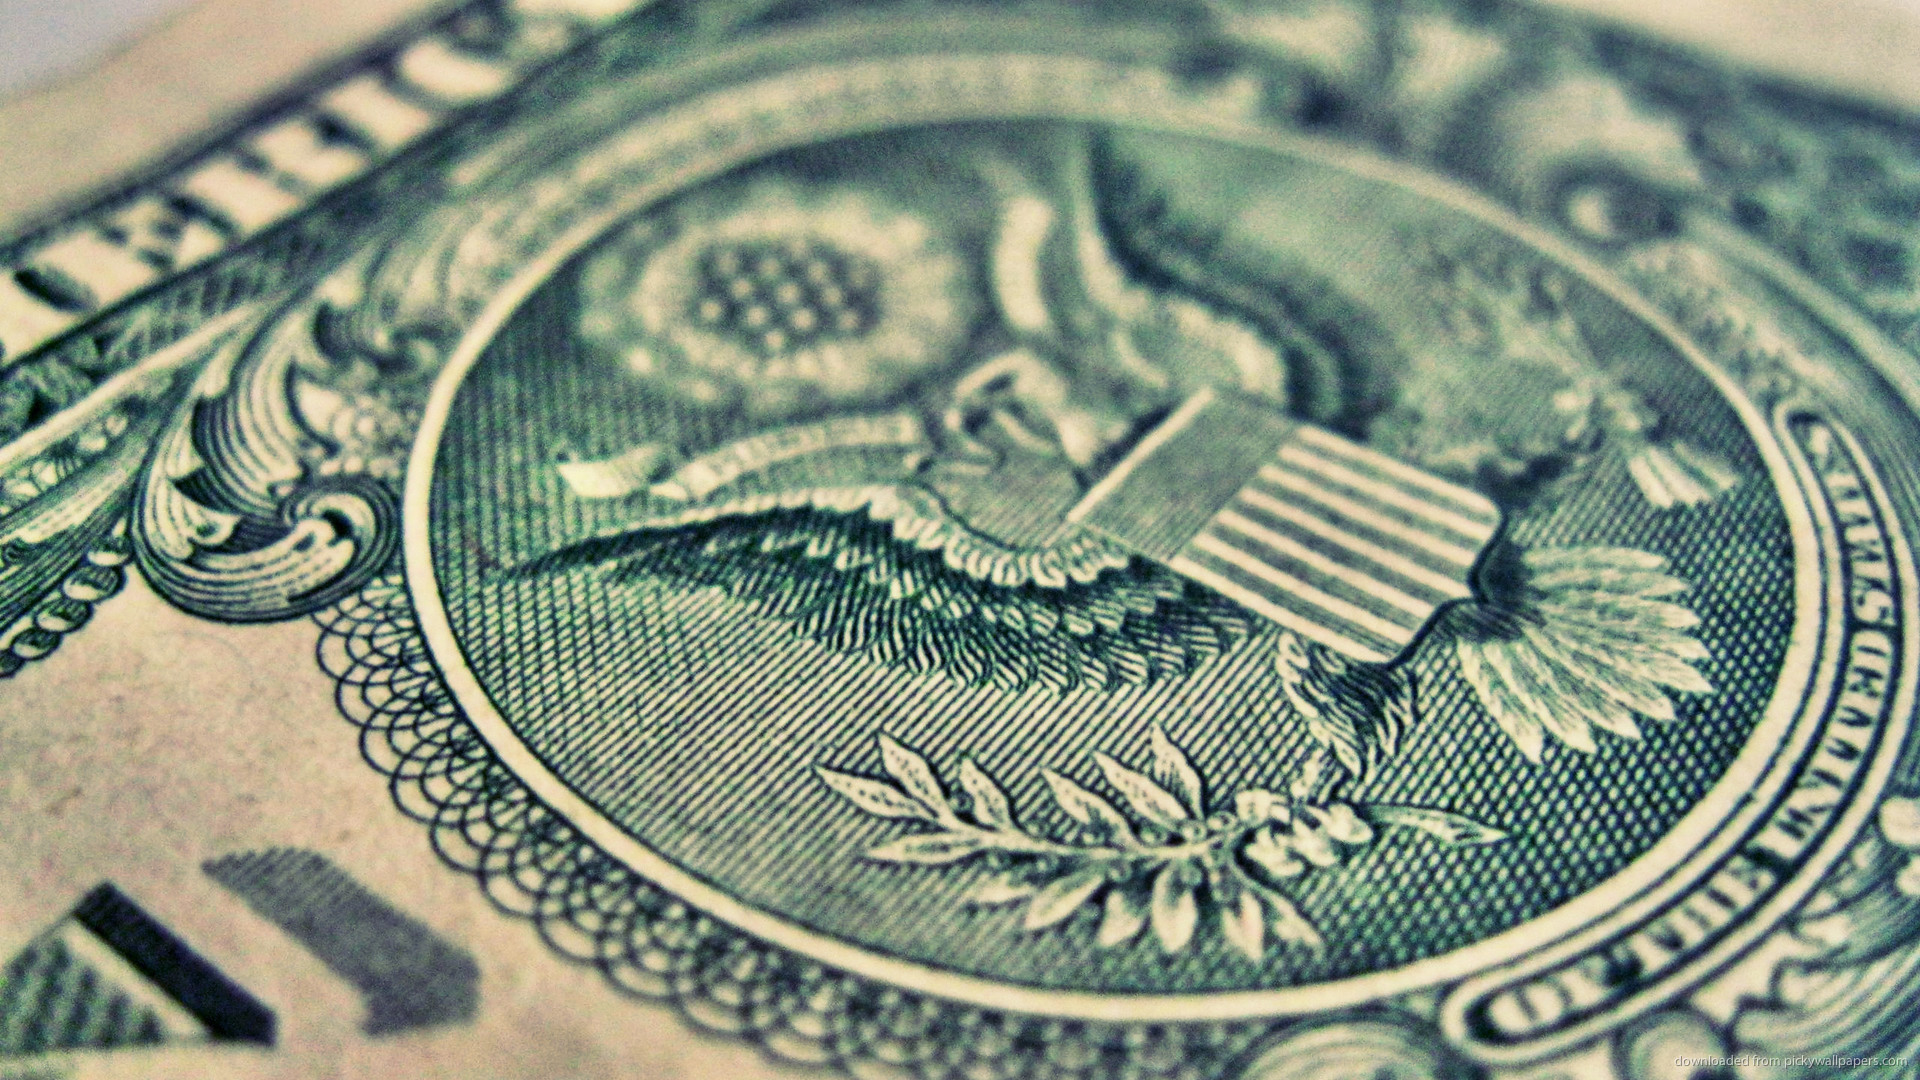 1920x1080 HD USA Coat of Arms on Money wallpaper